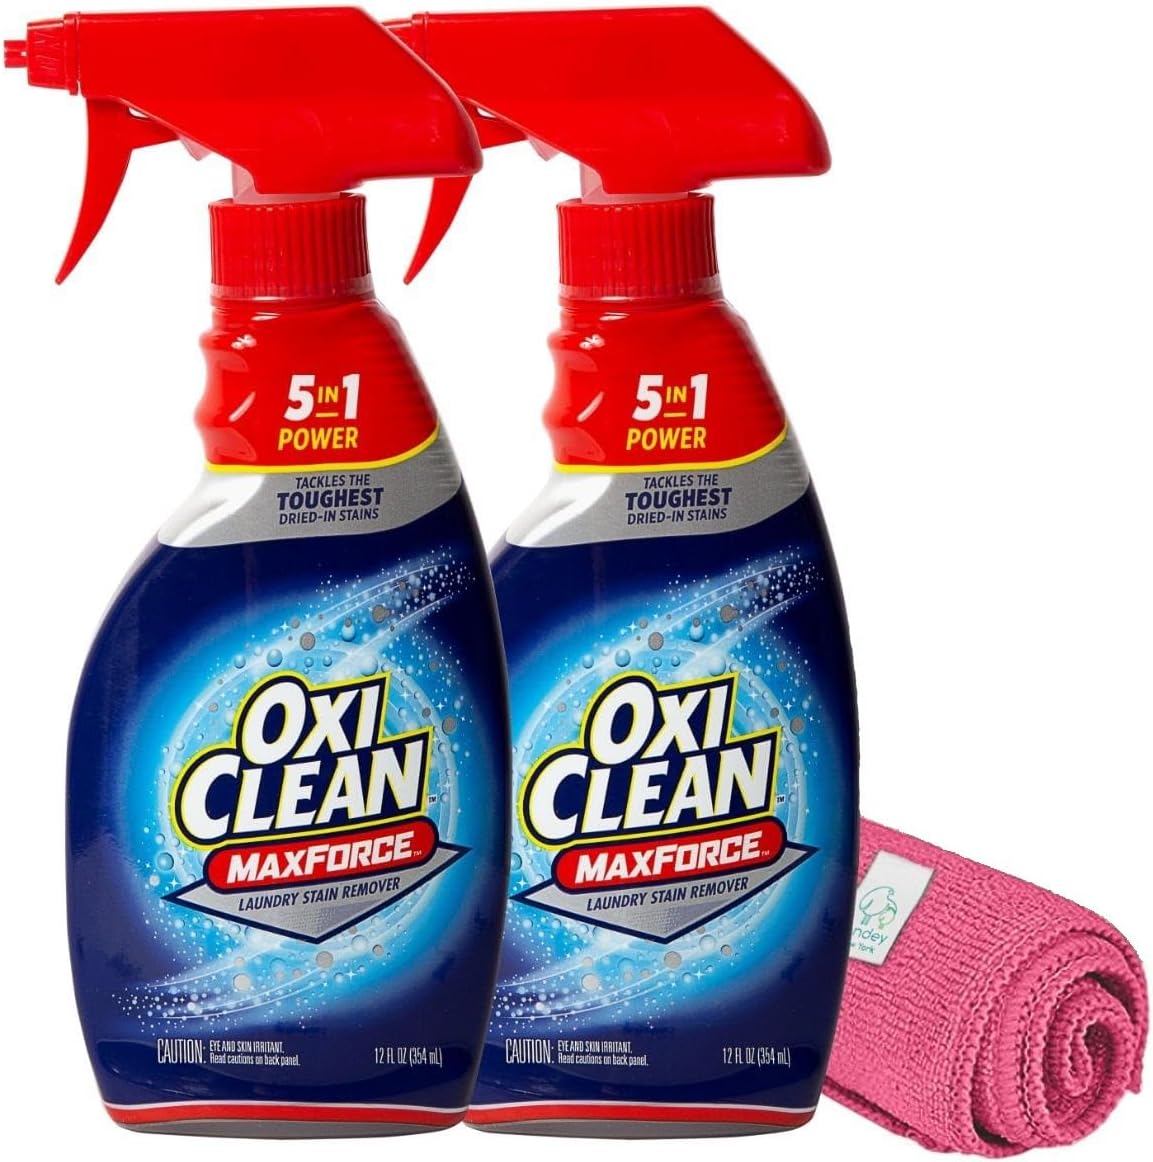 OxiClean Max Force Laundry Stain Remover Spray, 12 Ounce, 2-Pack, Bundled with A Jondey Microfiber Cleaning Cloth (Colors May Vary)